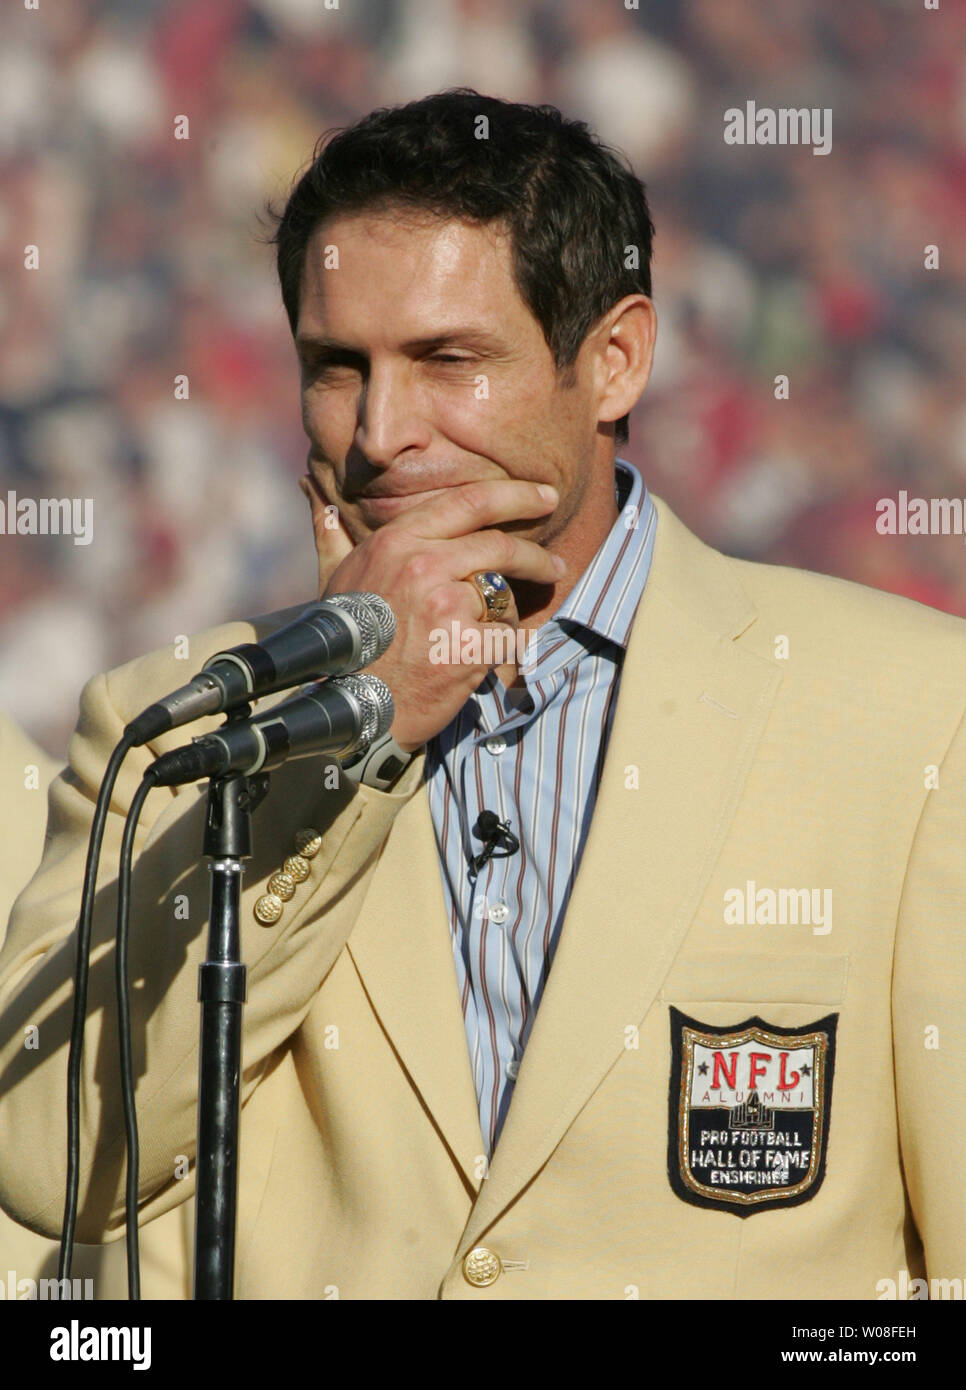 Hall of Fame QB Steve Young waits for the applause to stop before speaking at Monster Park in San Francisco on November 20, 2005. Young was honored as a new enshrinee to the Hall.  (UPI Photo/Terry Schmitt) Stock Photo